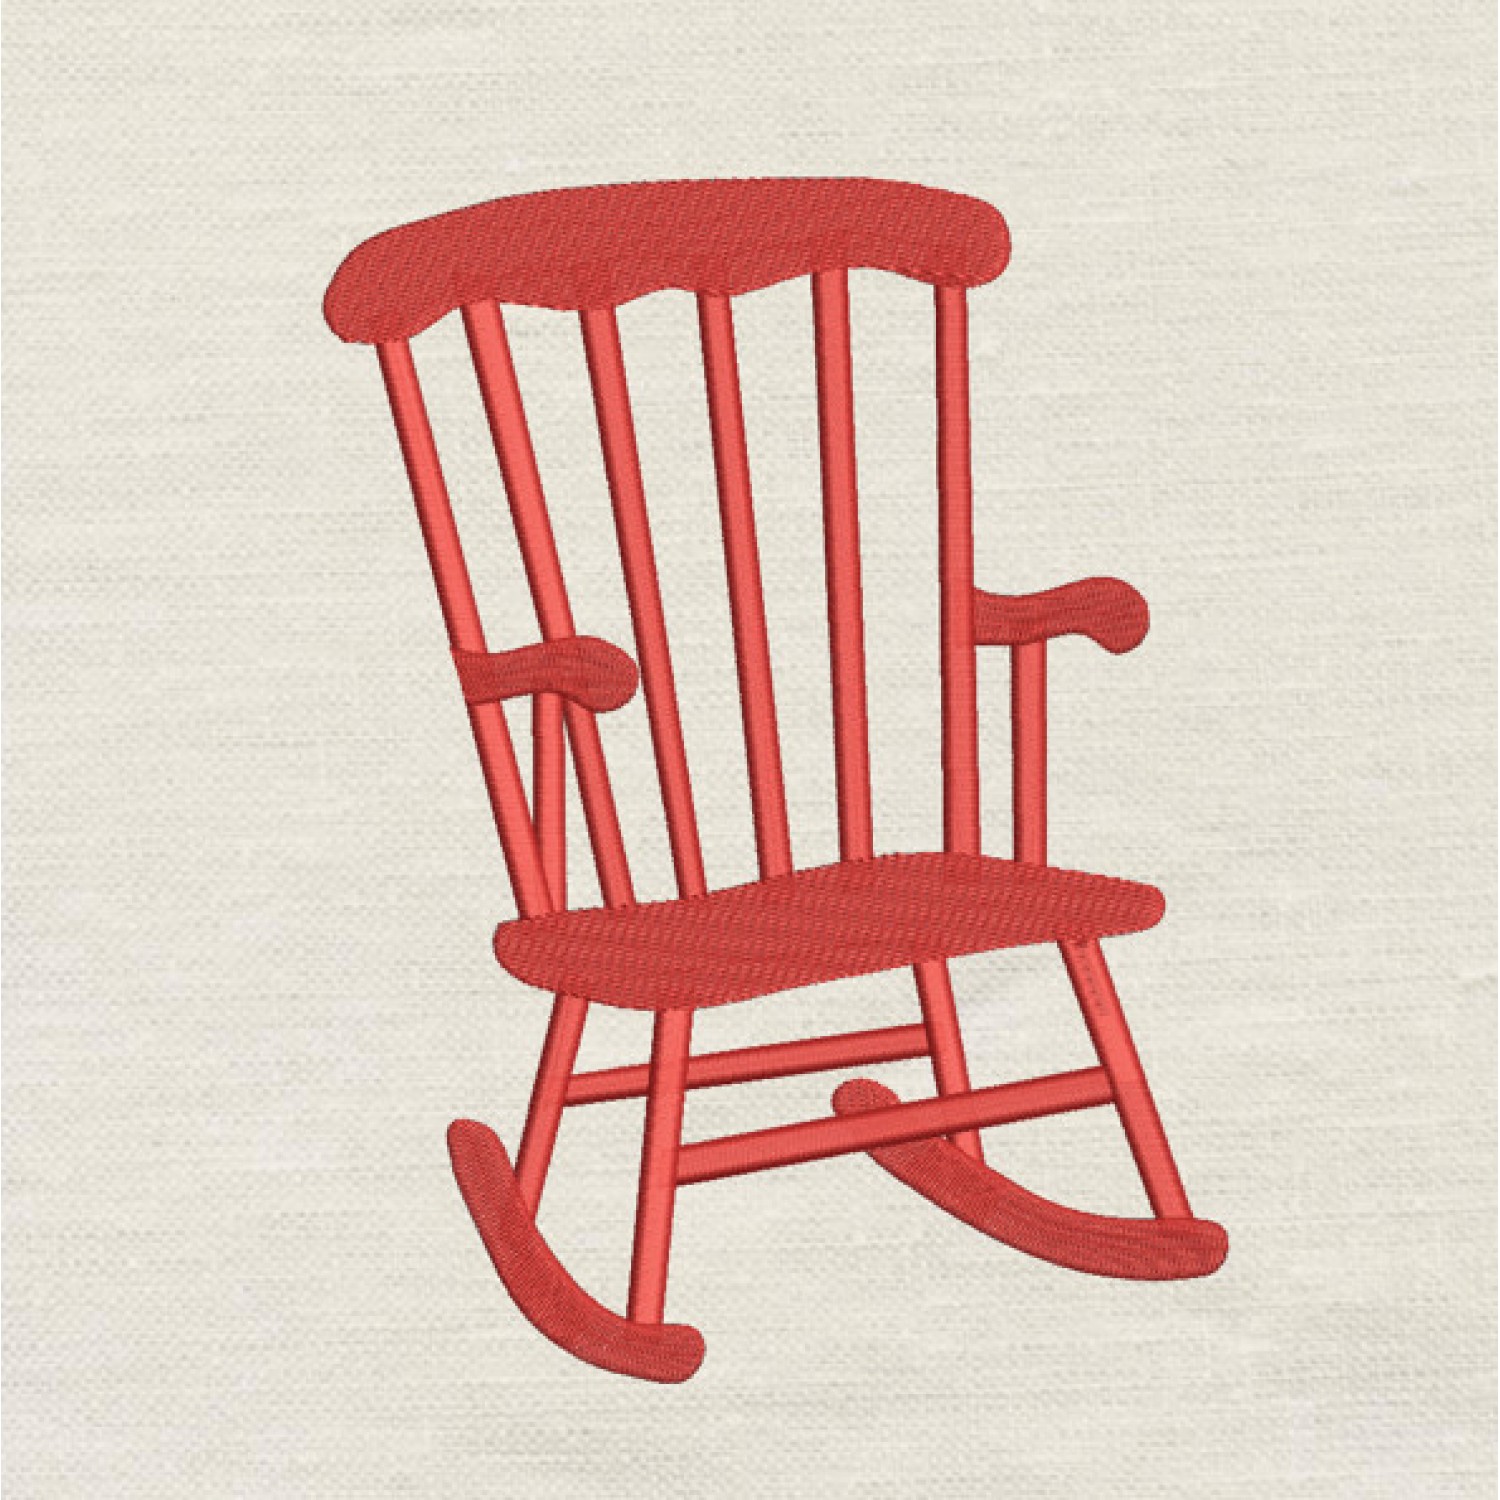 Chair v2 embroidery design